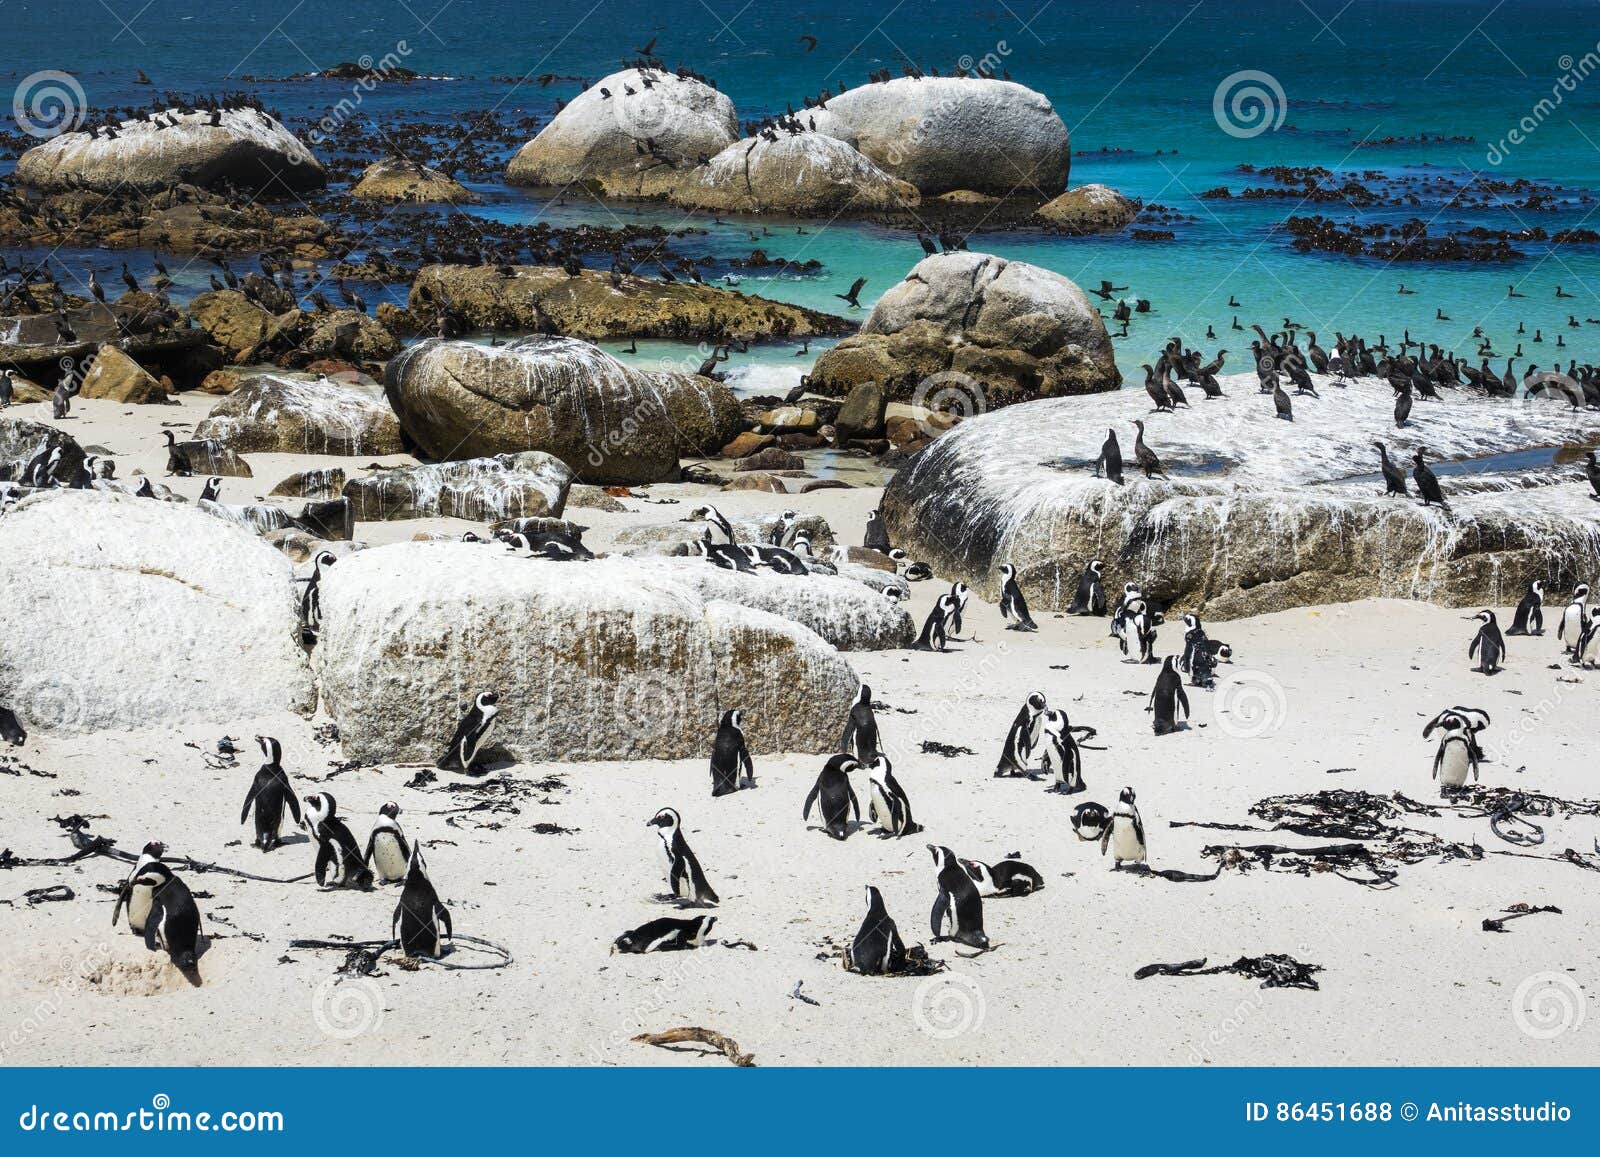 african penguins at boulders beach, cape town, south africa